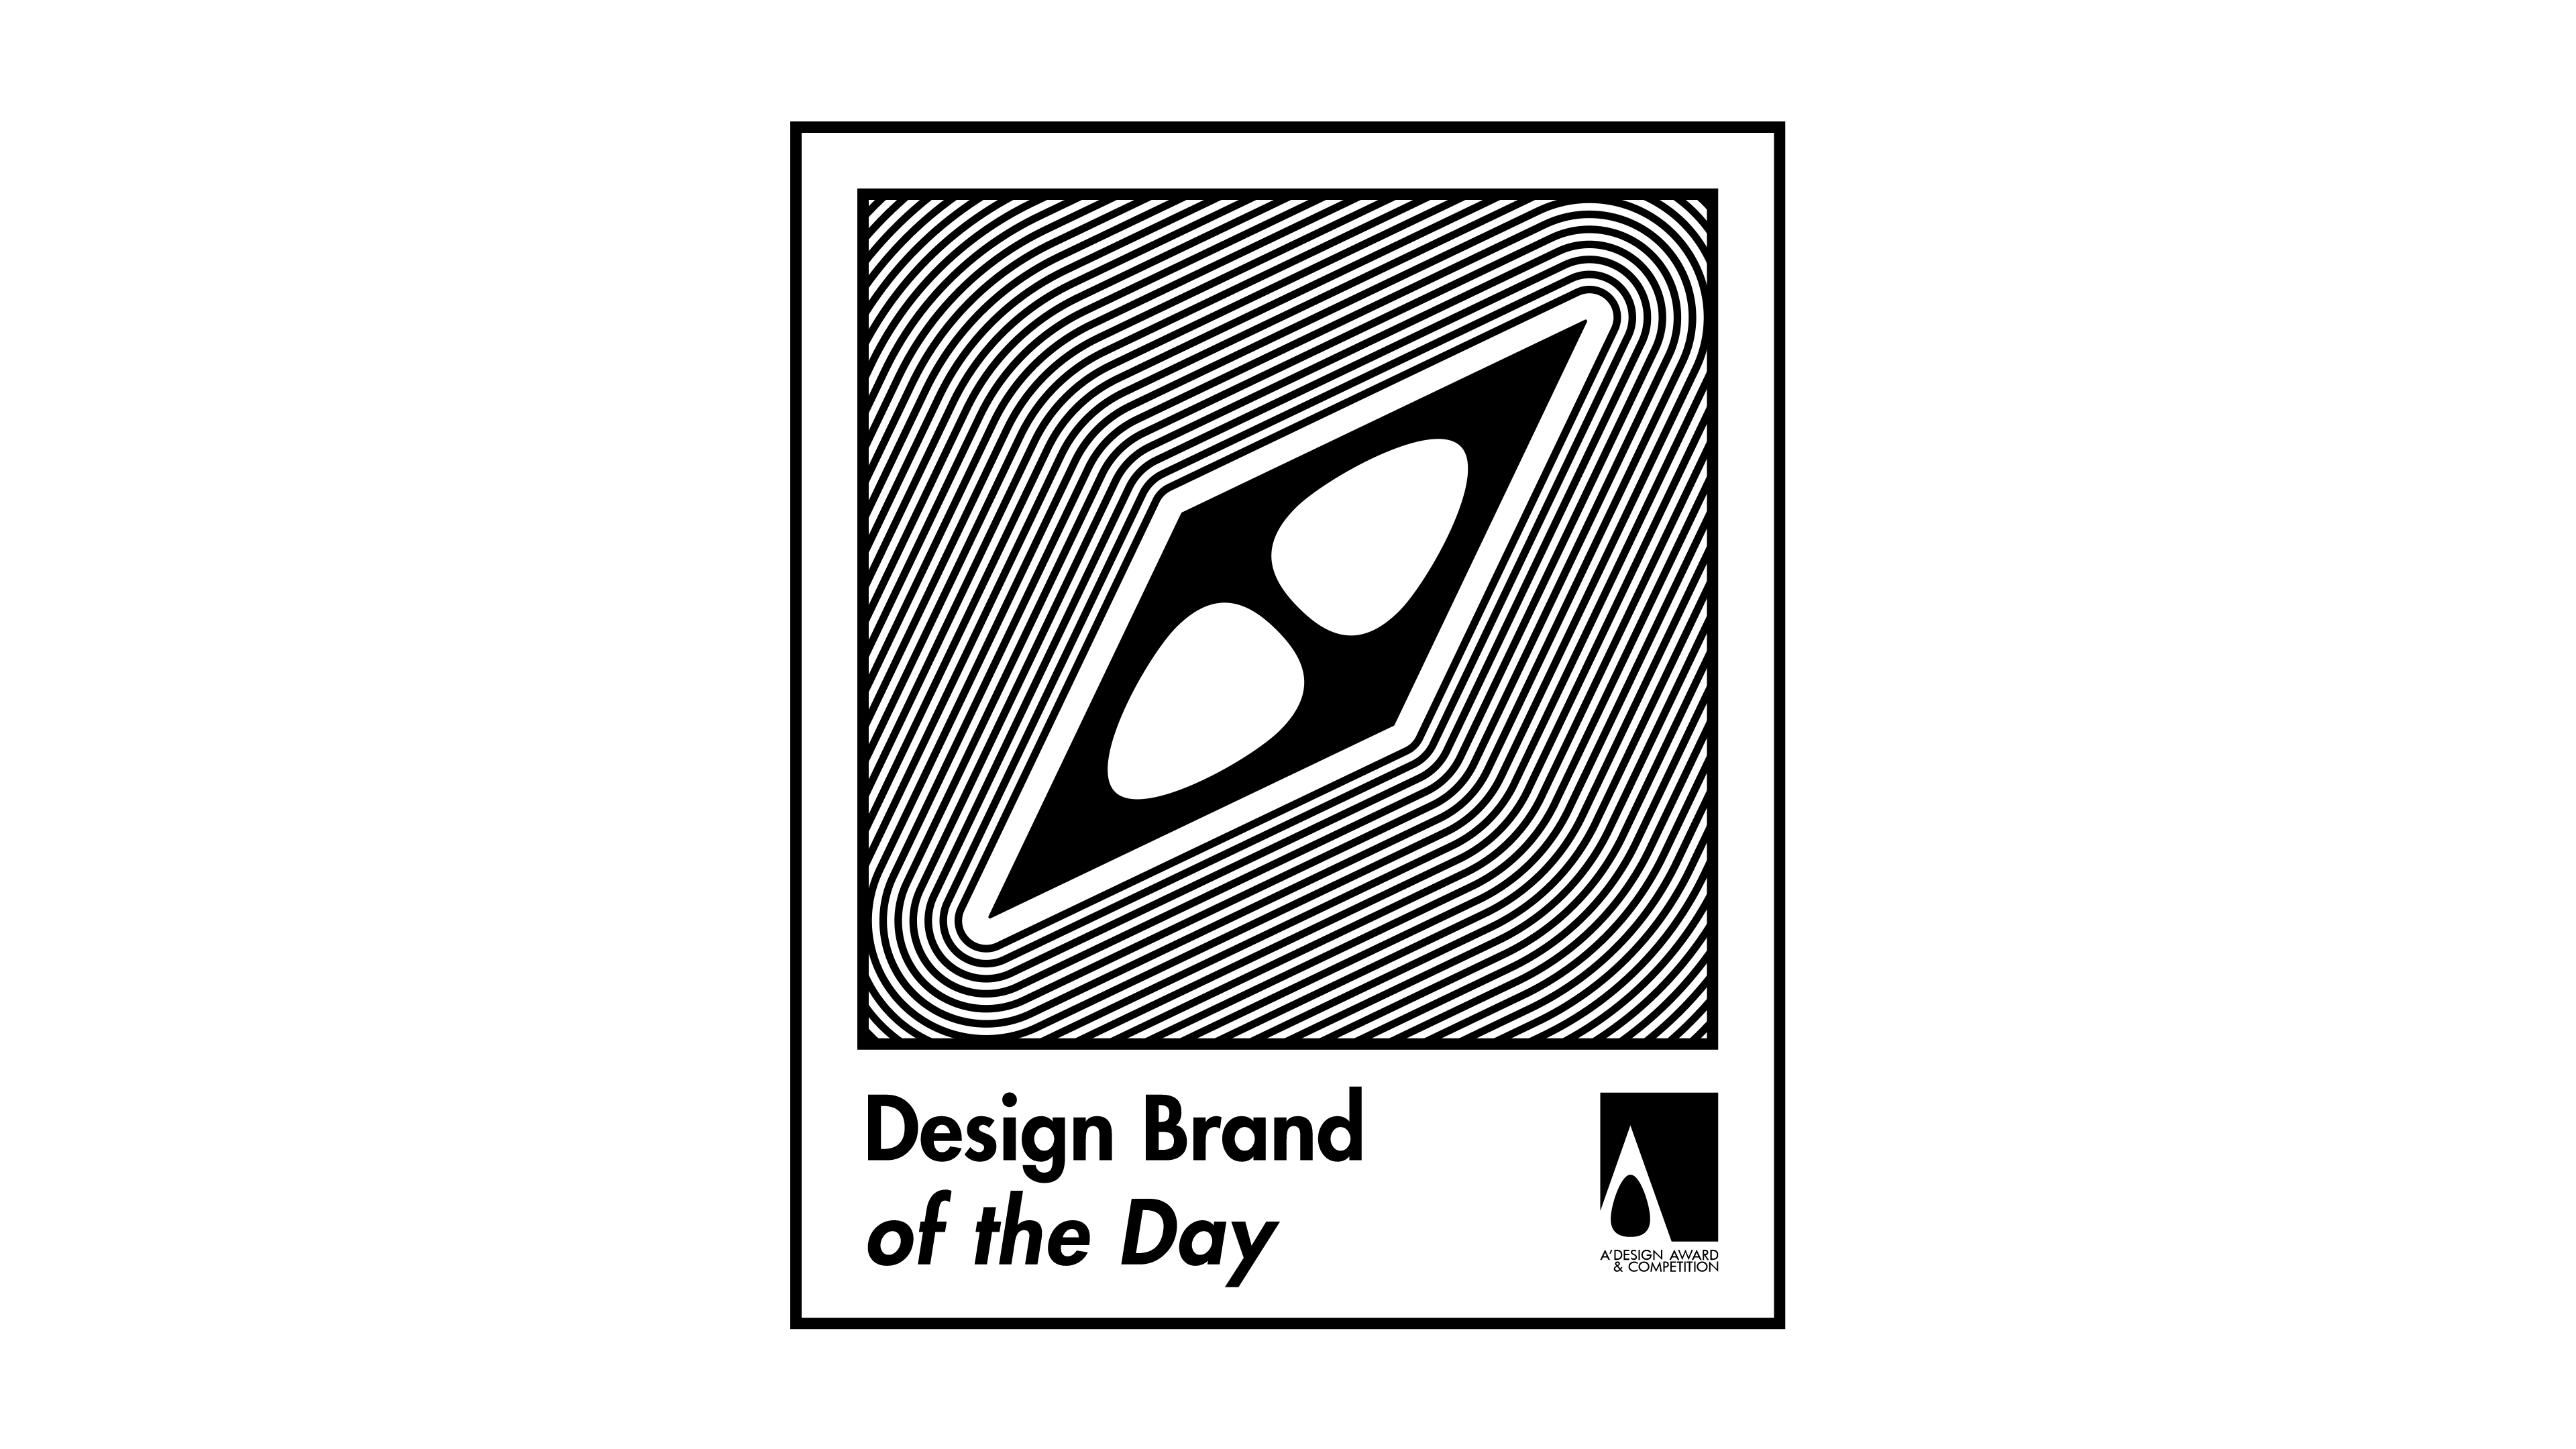 Design Brand of the Day